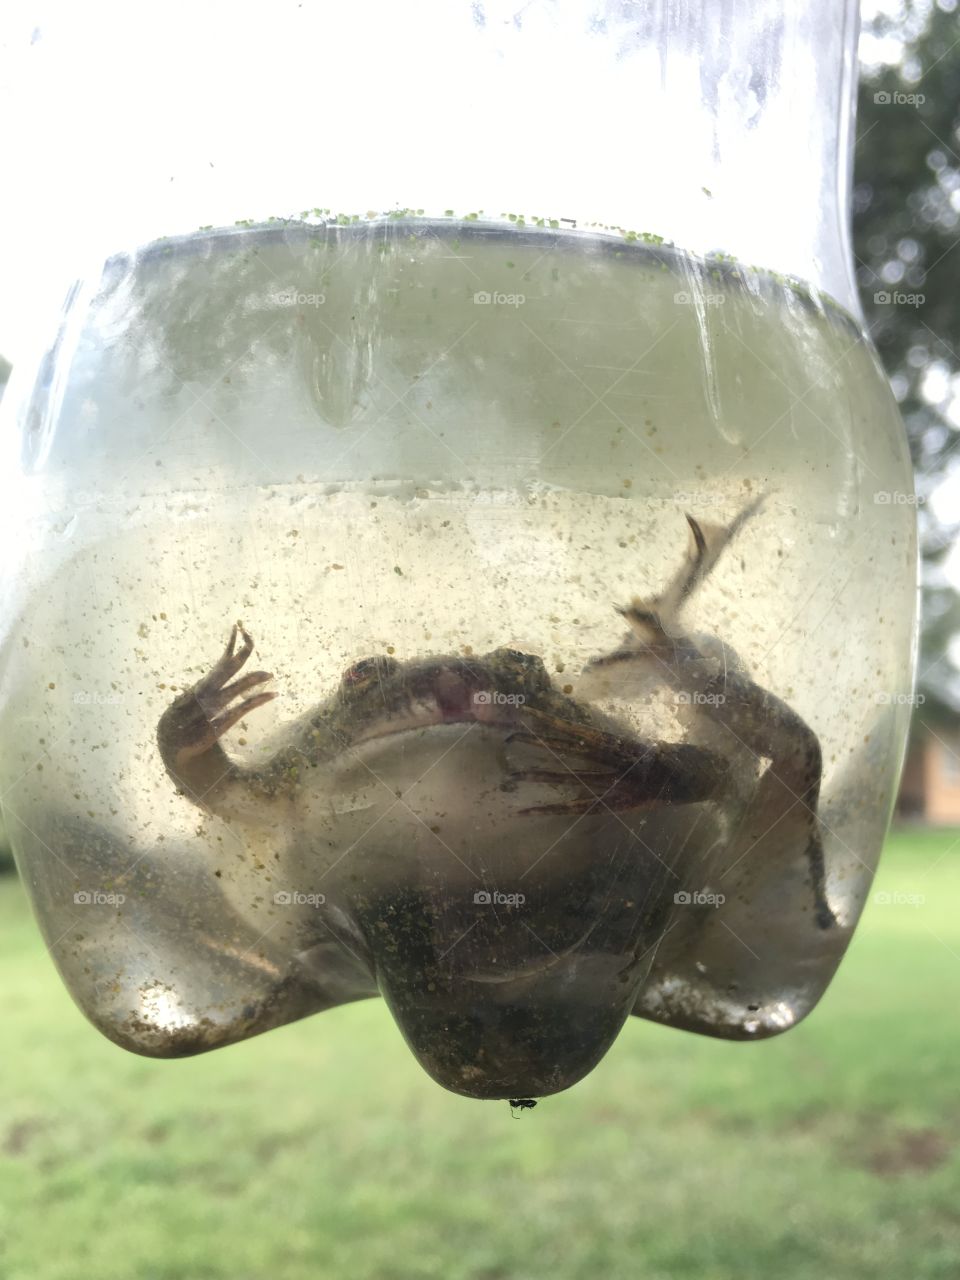 African clawed frog in a bottle